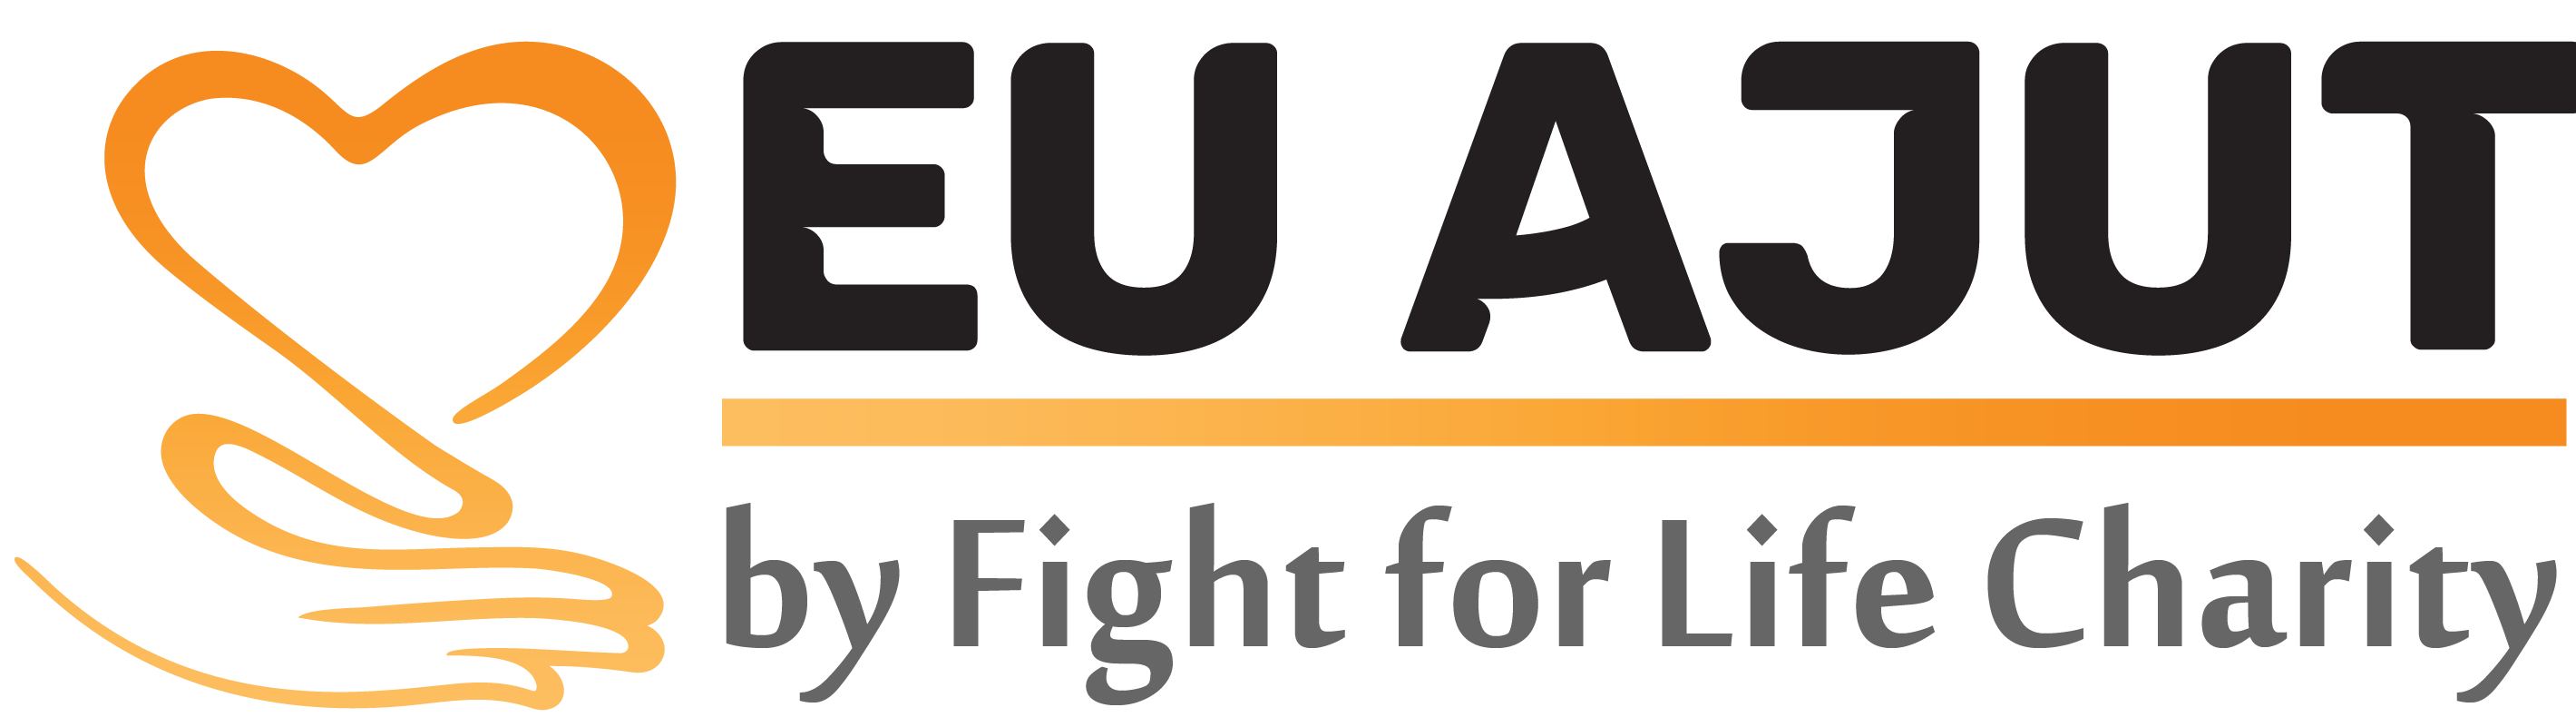 Fight for Life Charity logo